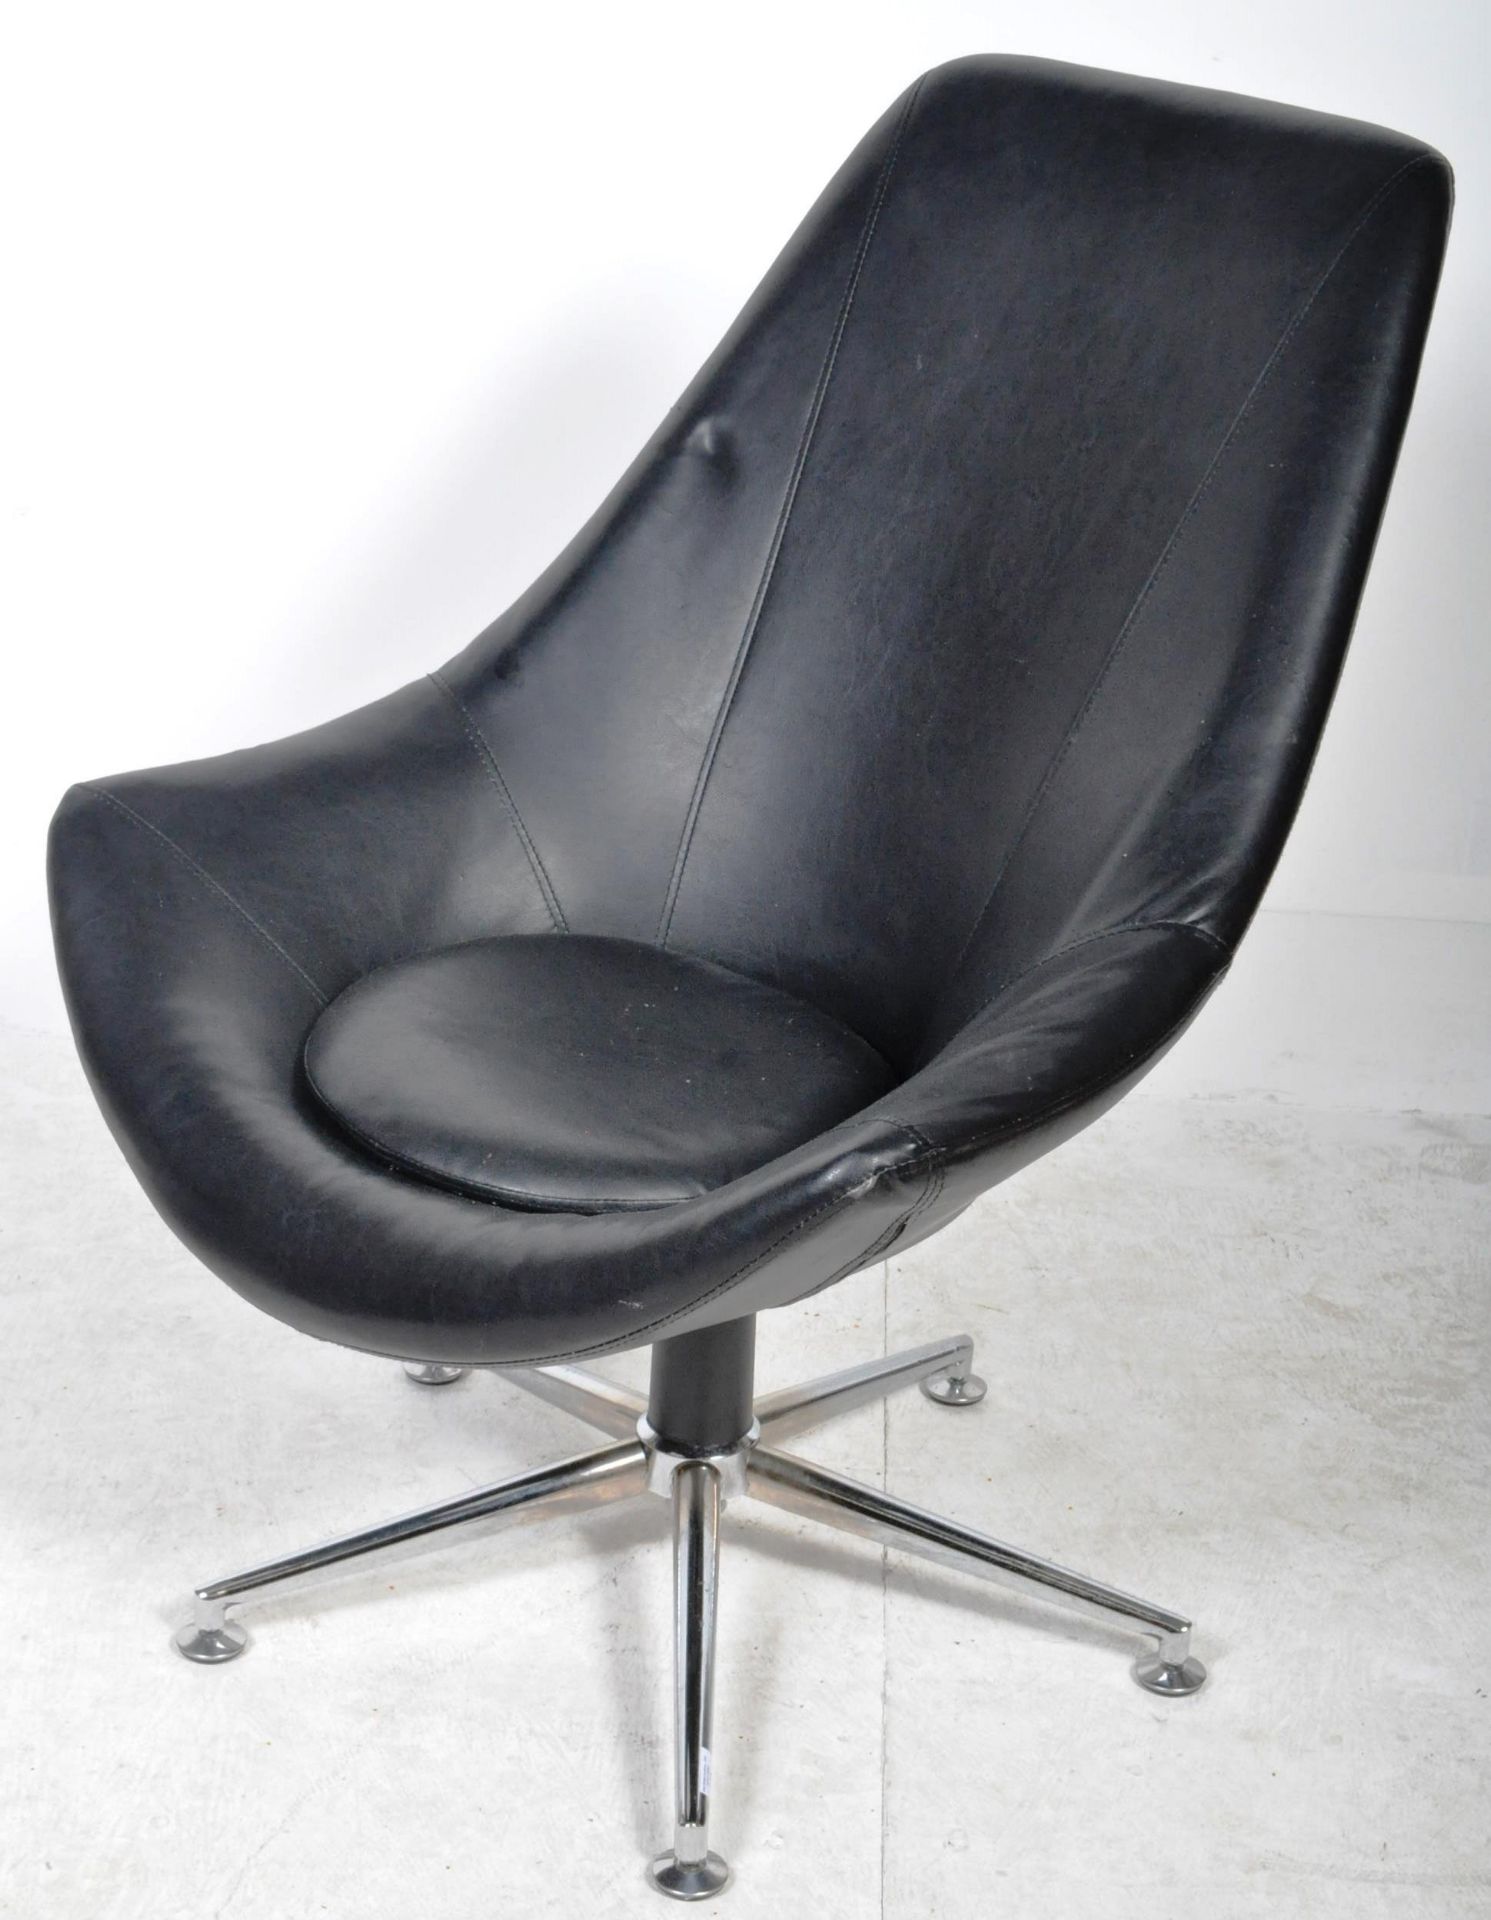 RETRO 1970'S BLACK LEATHER EGG CHAIR RAISED ON A CHROME BASE - Image 2 of 6